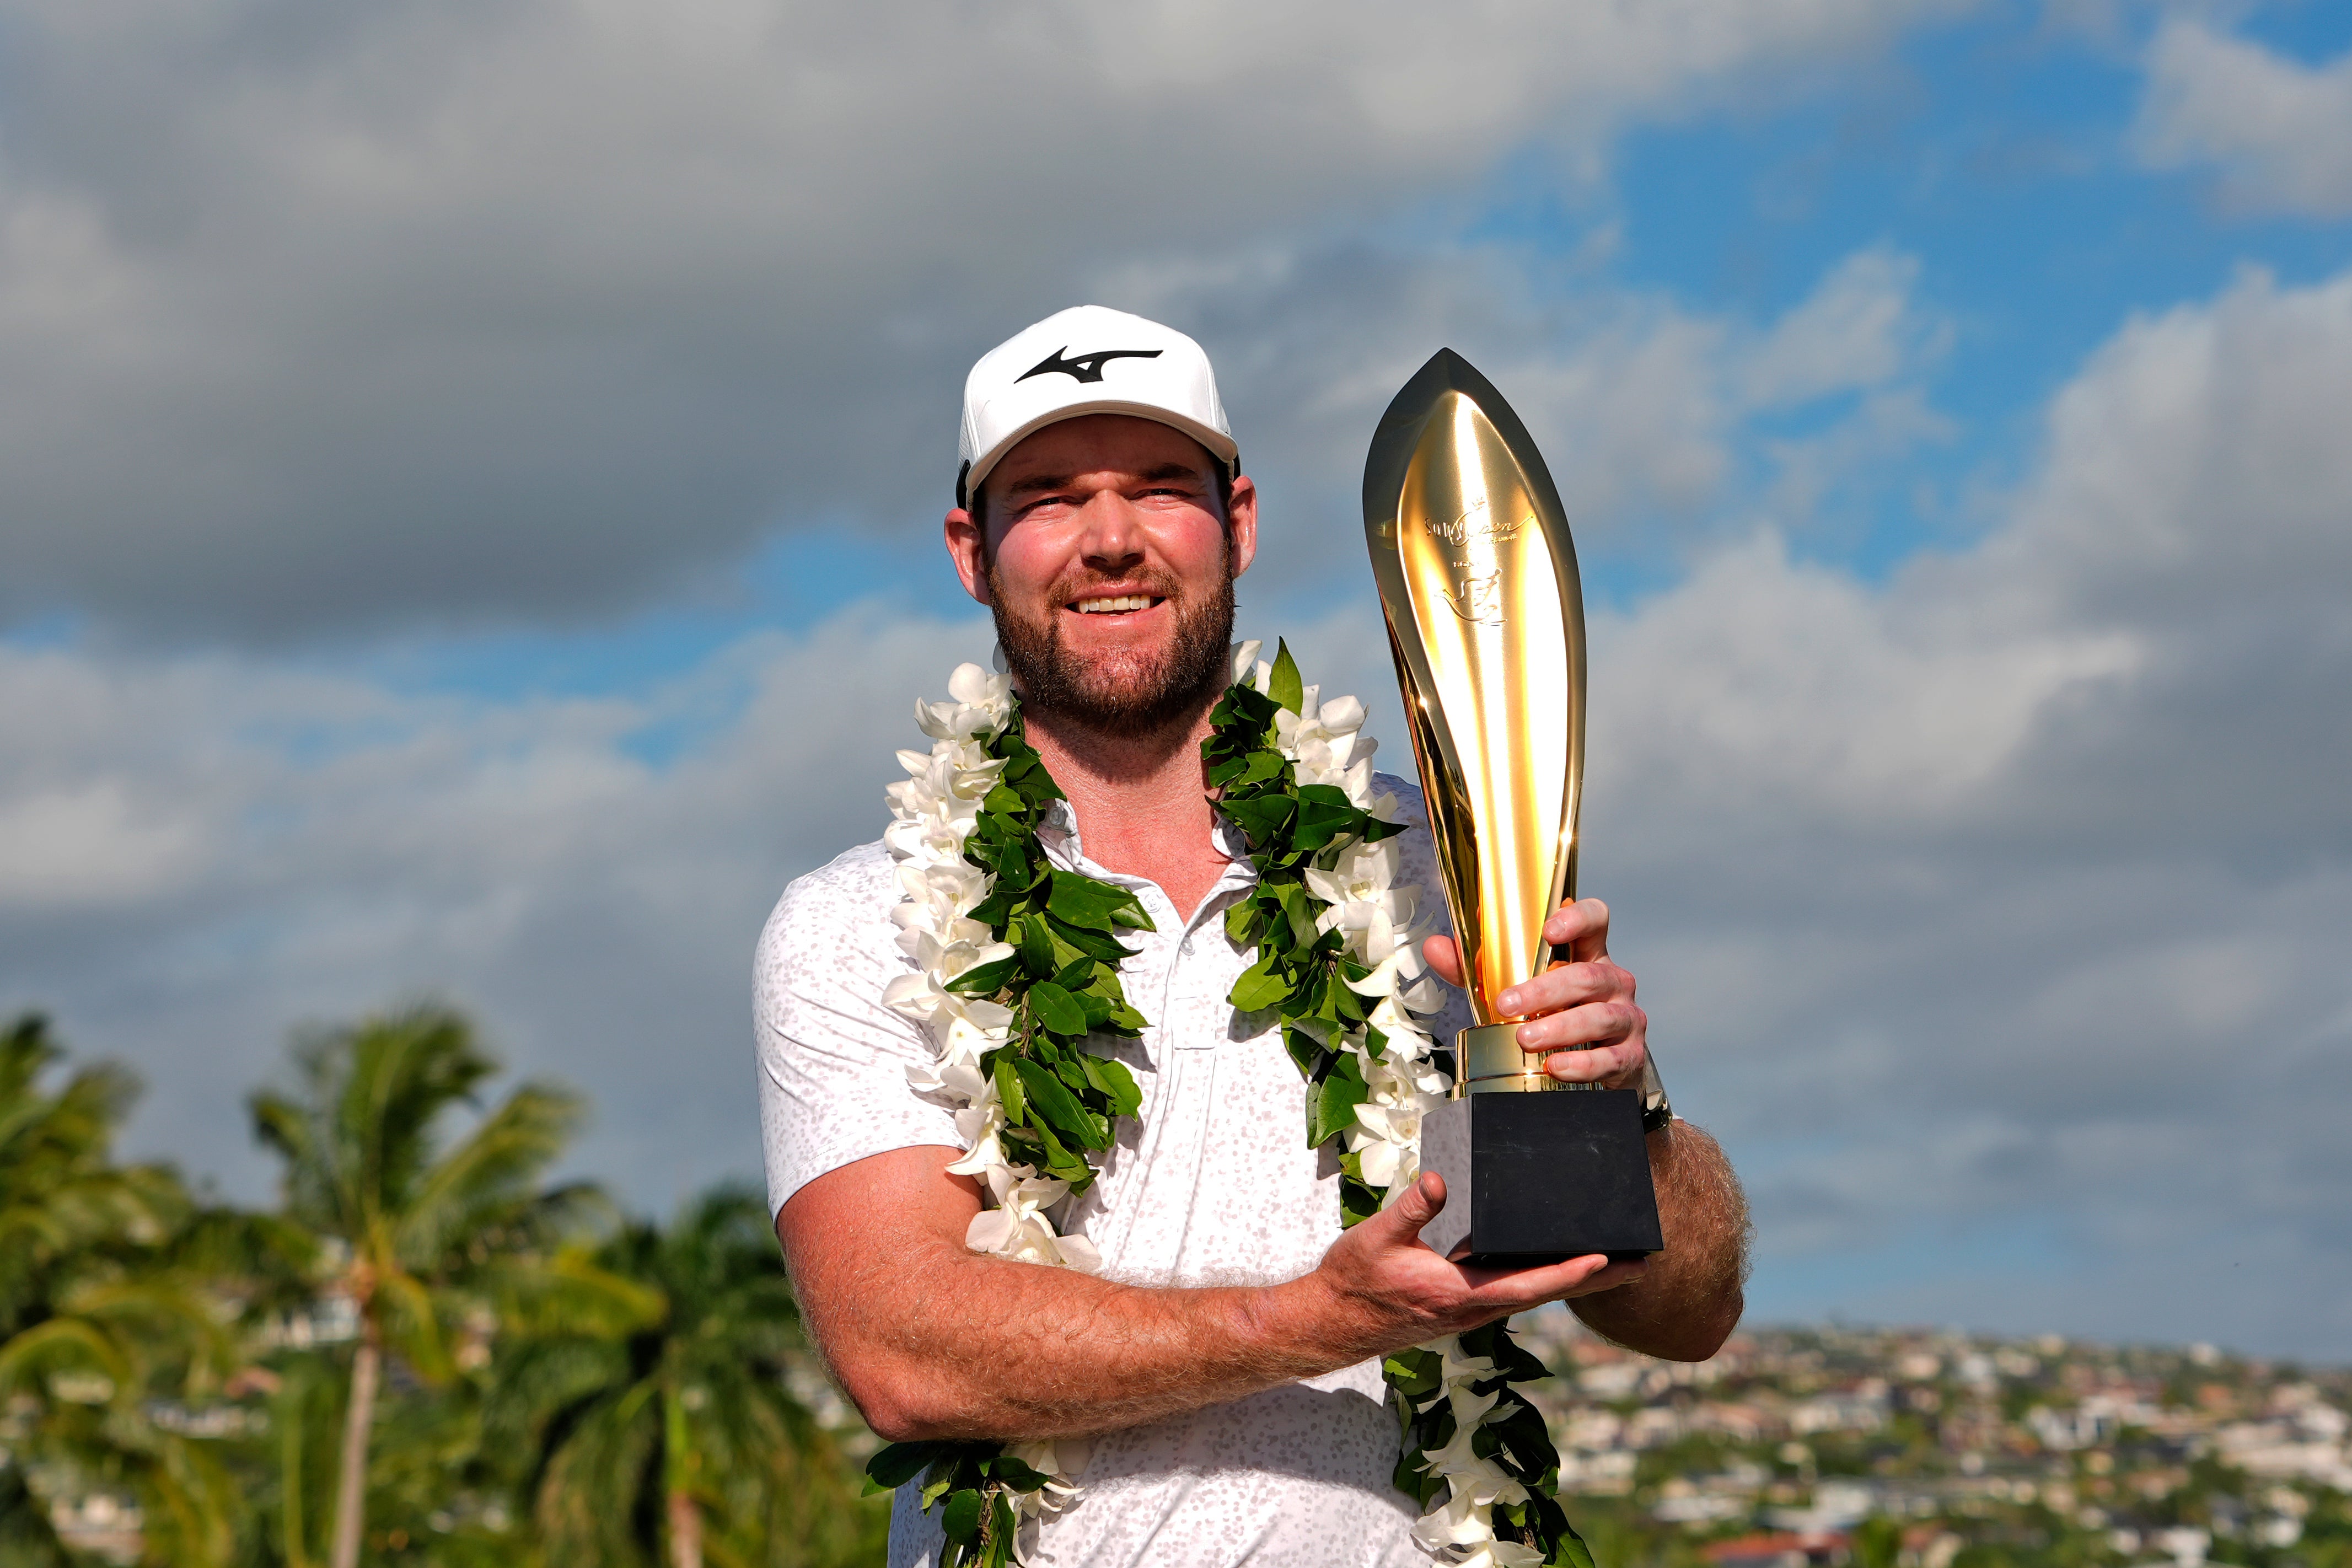 Grayson Murray won the Sony Open earlier this year